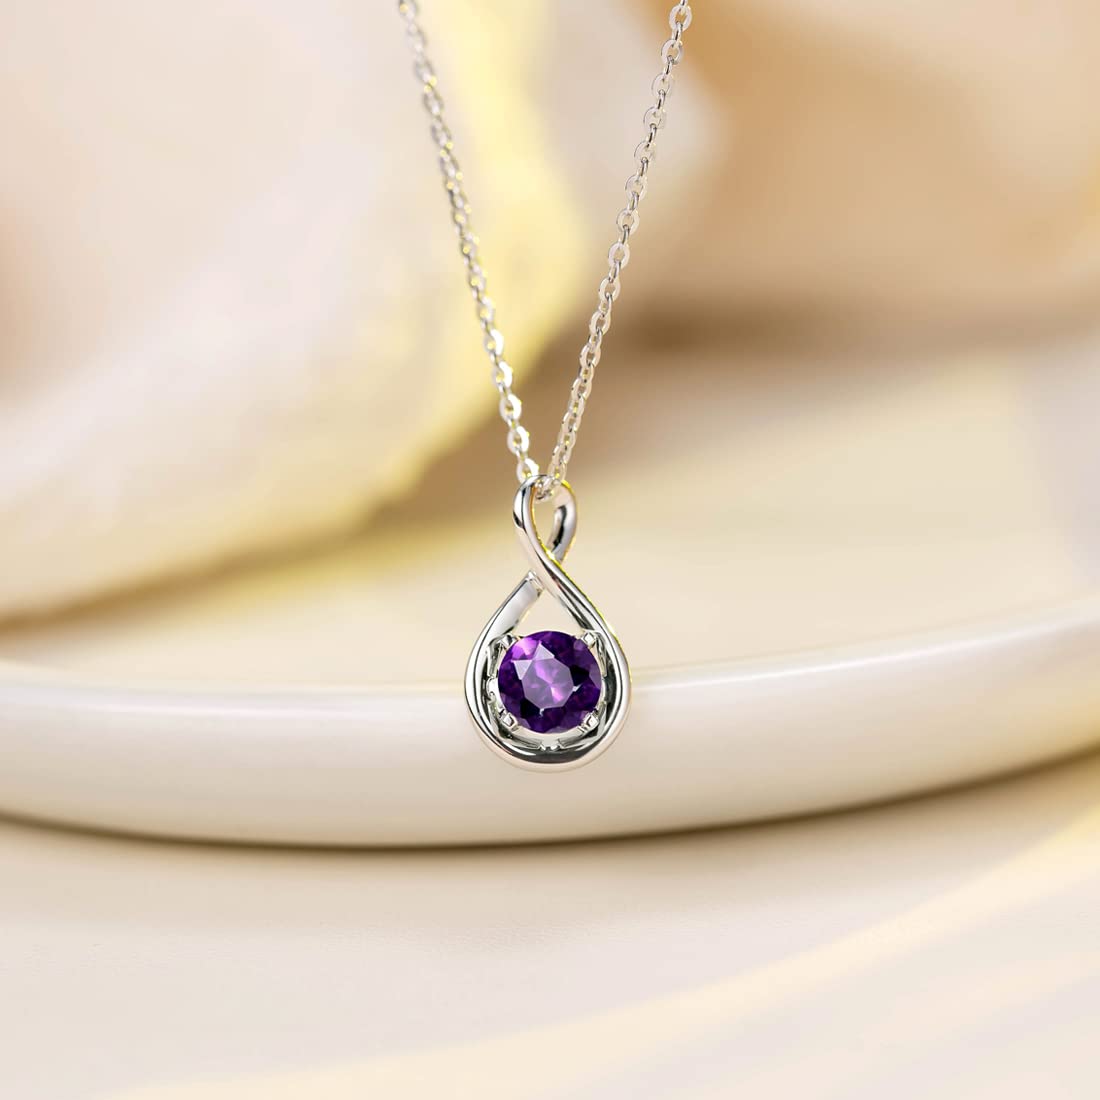 FANCIME 14K Solid White Gold Birthstone Pendant with Sterling Silver Adjustable Chain Dainty Infinity Gemstone Necklace Fine Jewelry Anniversary Birthday Christmas Gifts for Women Girls Wife Lady Her